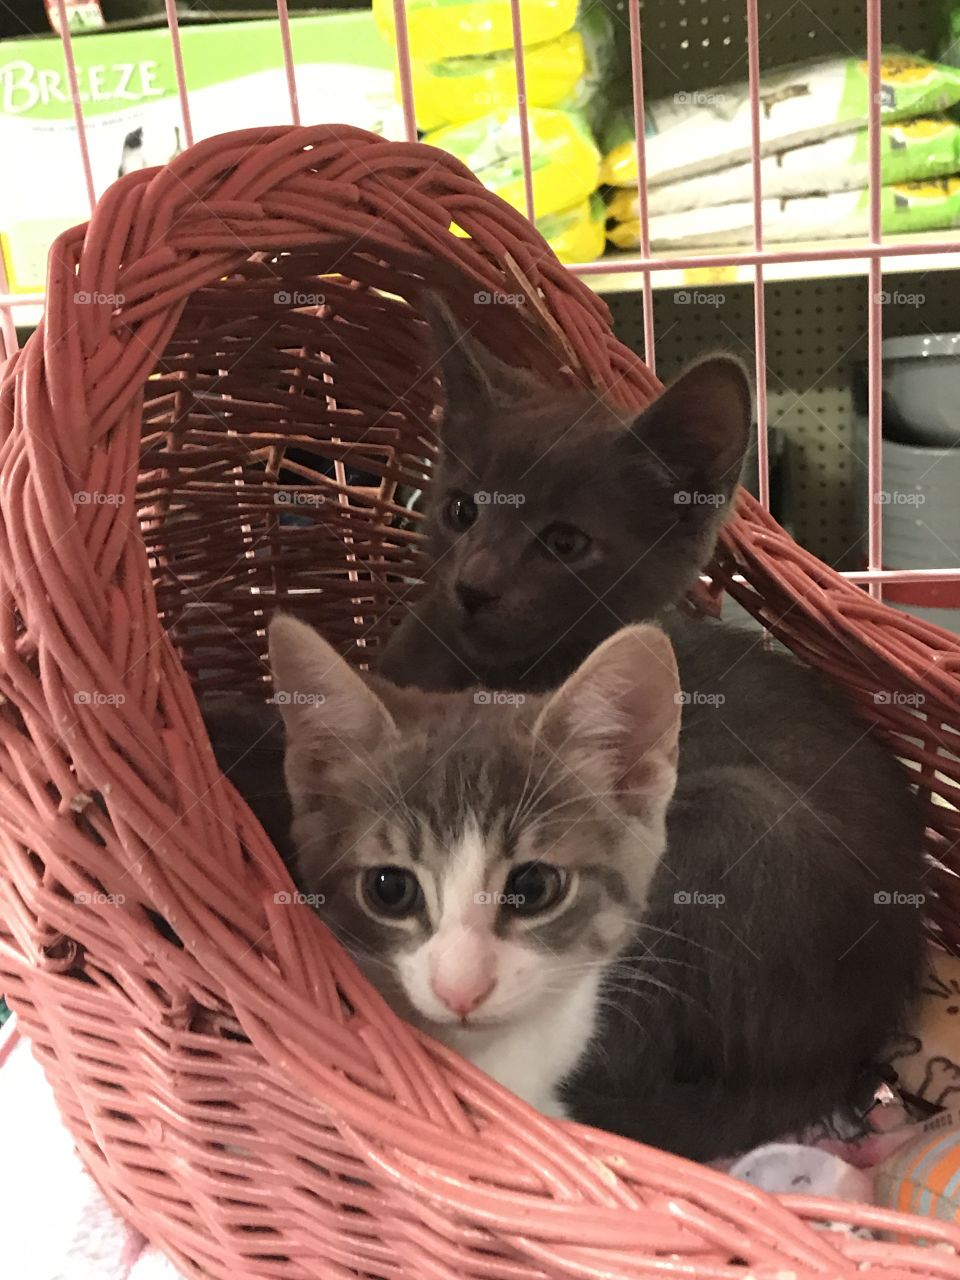 Two adorable young kittens, one with stormy gray fur and the other one a gray and white tabby, cuddle together in a red wicker basket awaiting adoption!